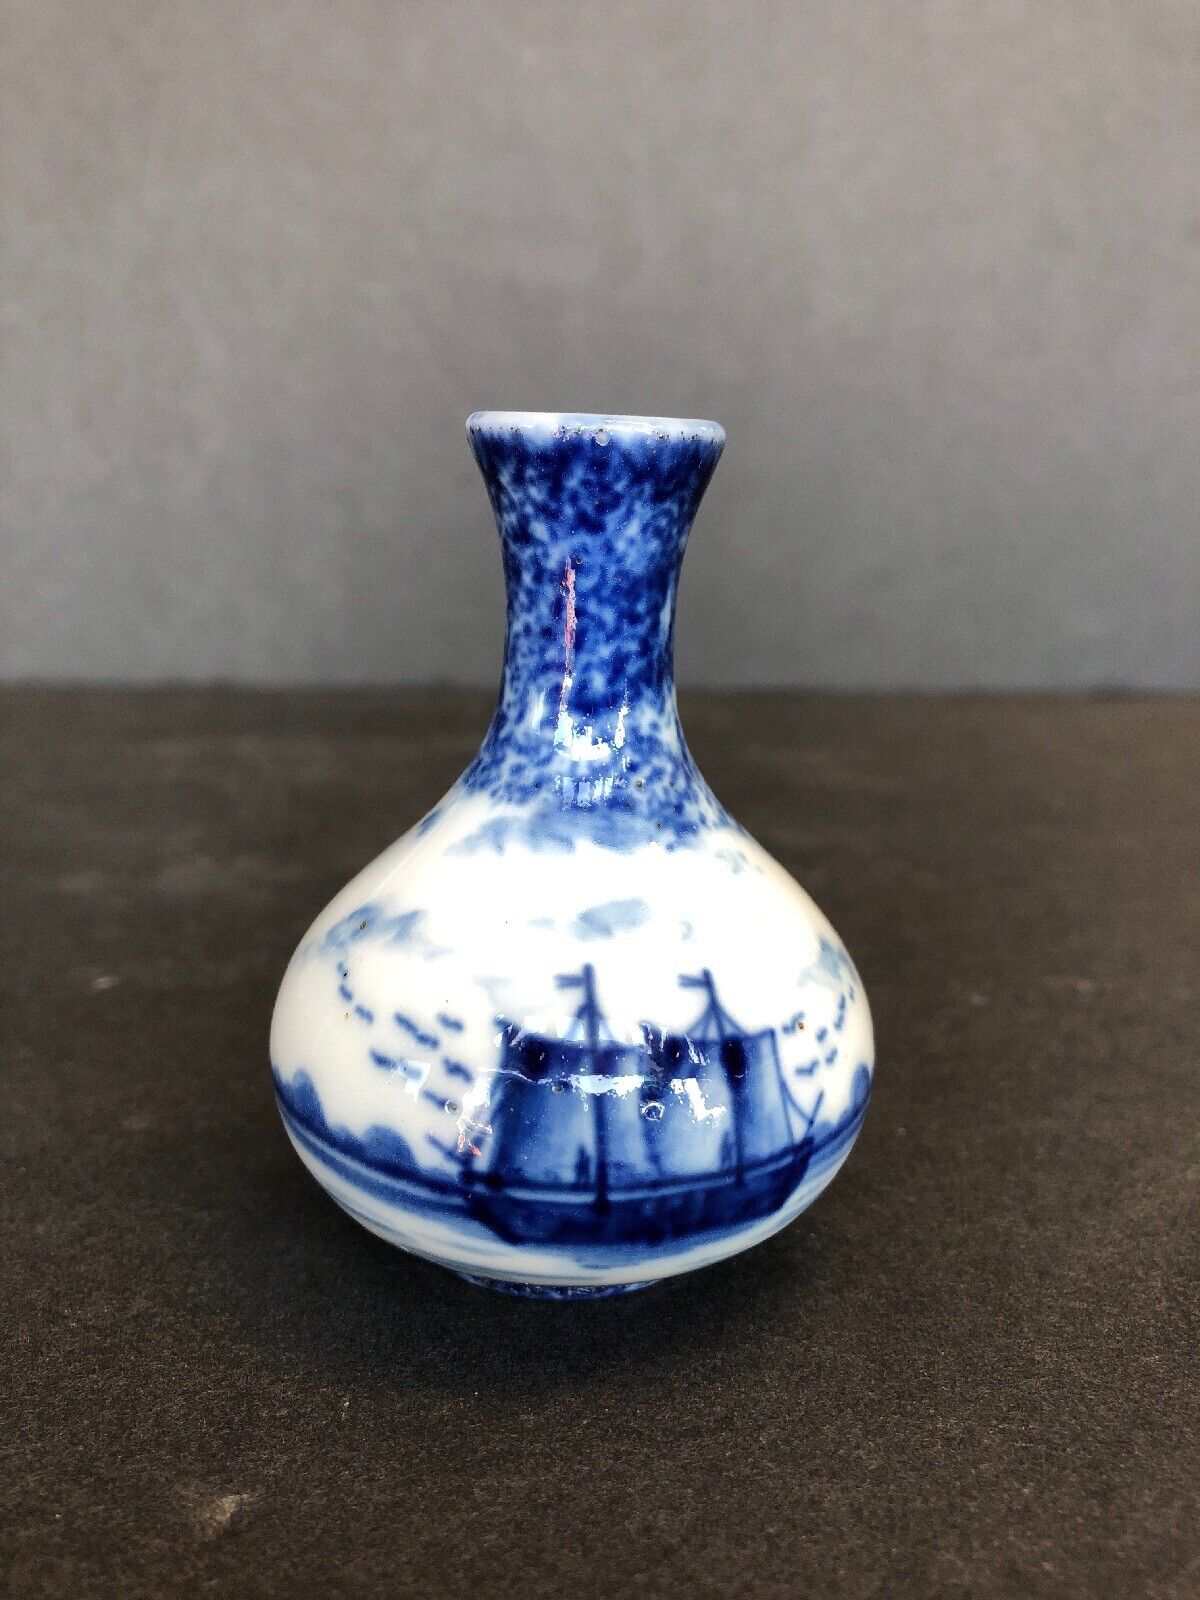 Vintage Antique Miniature Blue And White Flower Vase With Sailing Ship